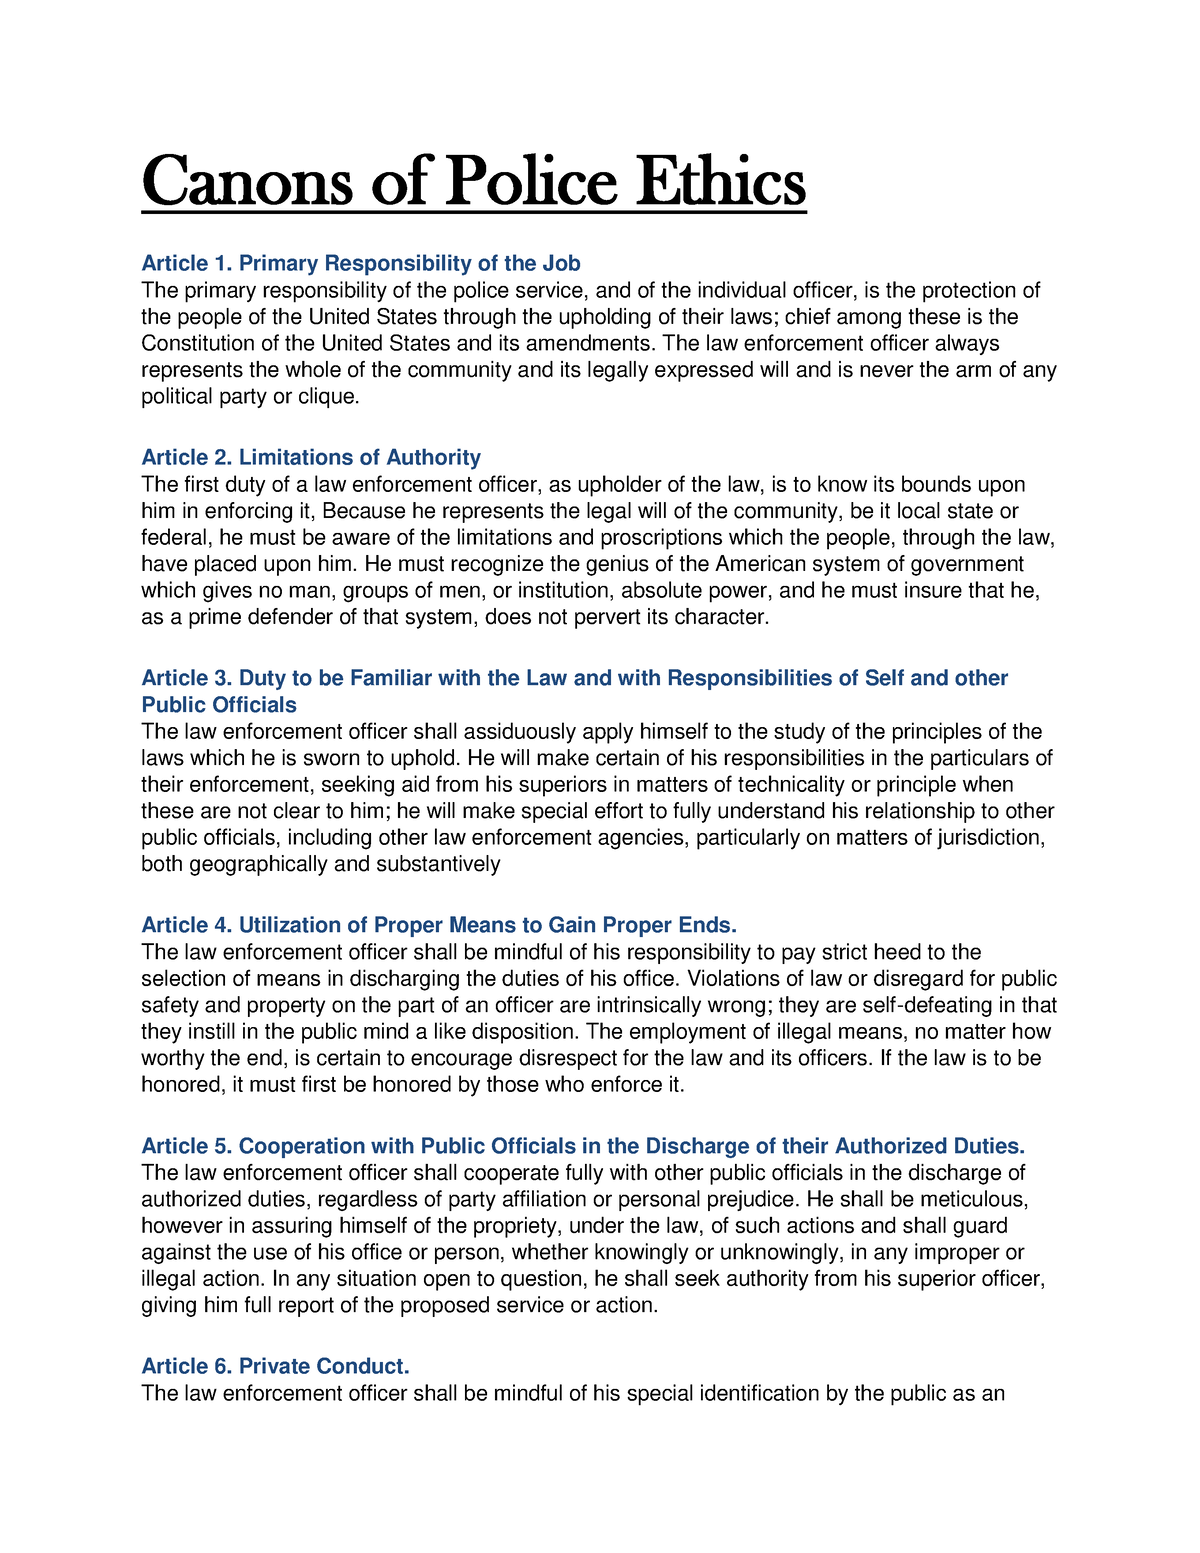 importance of ethics in law enforcement essay